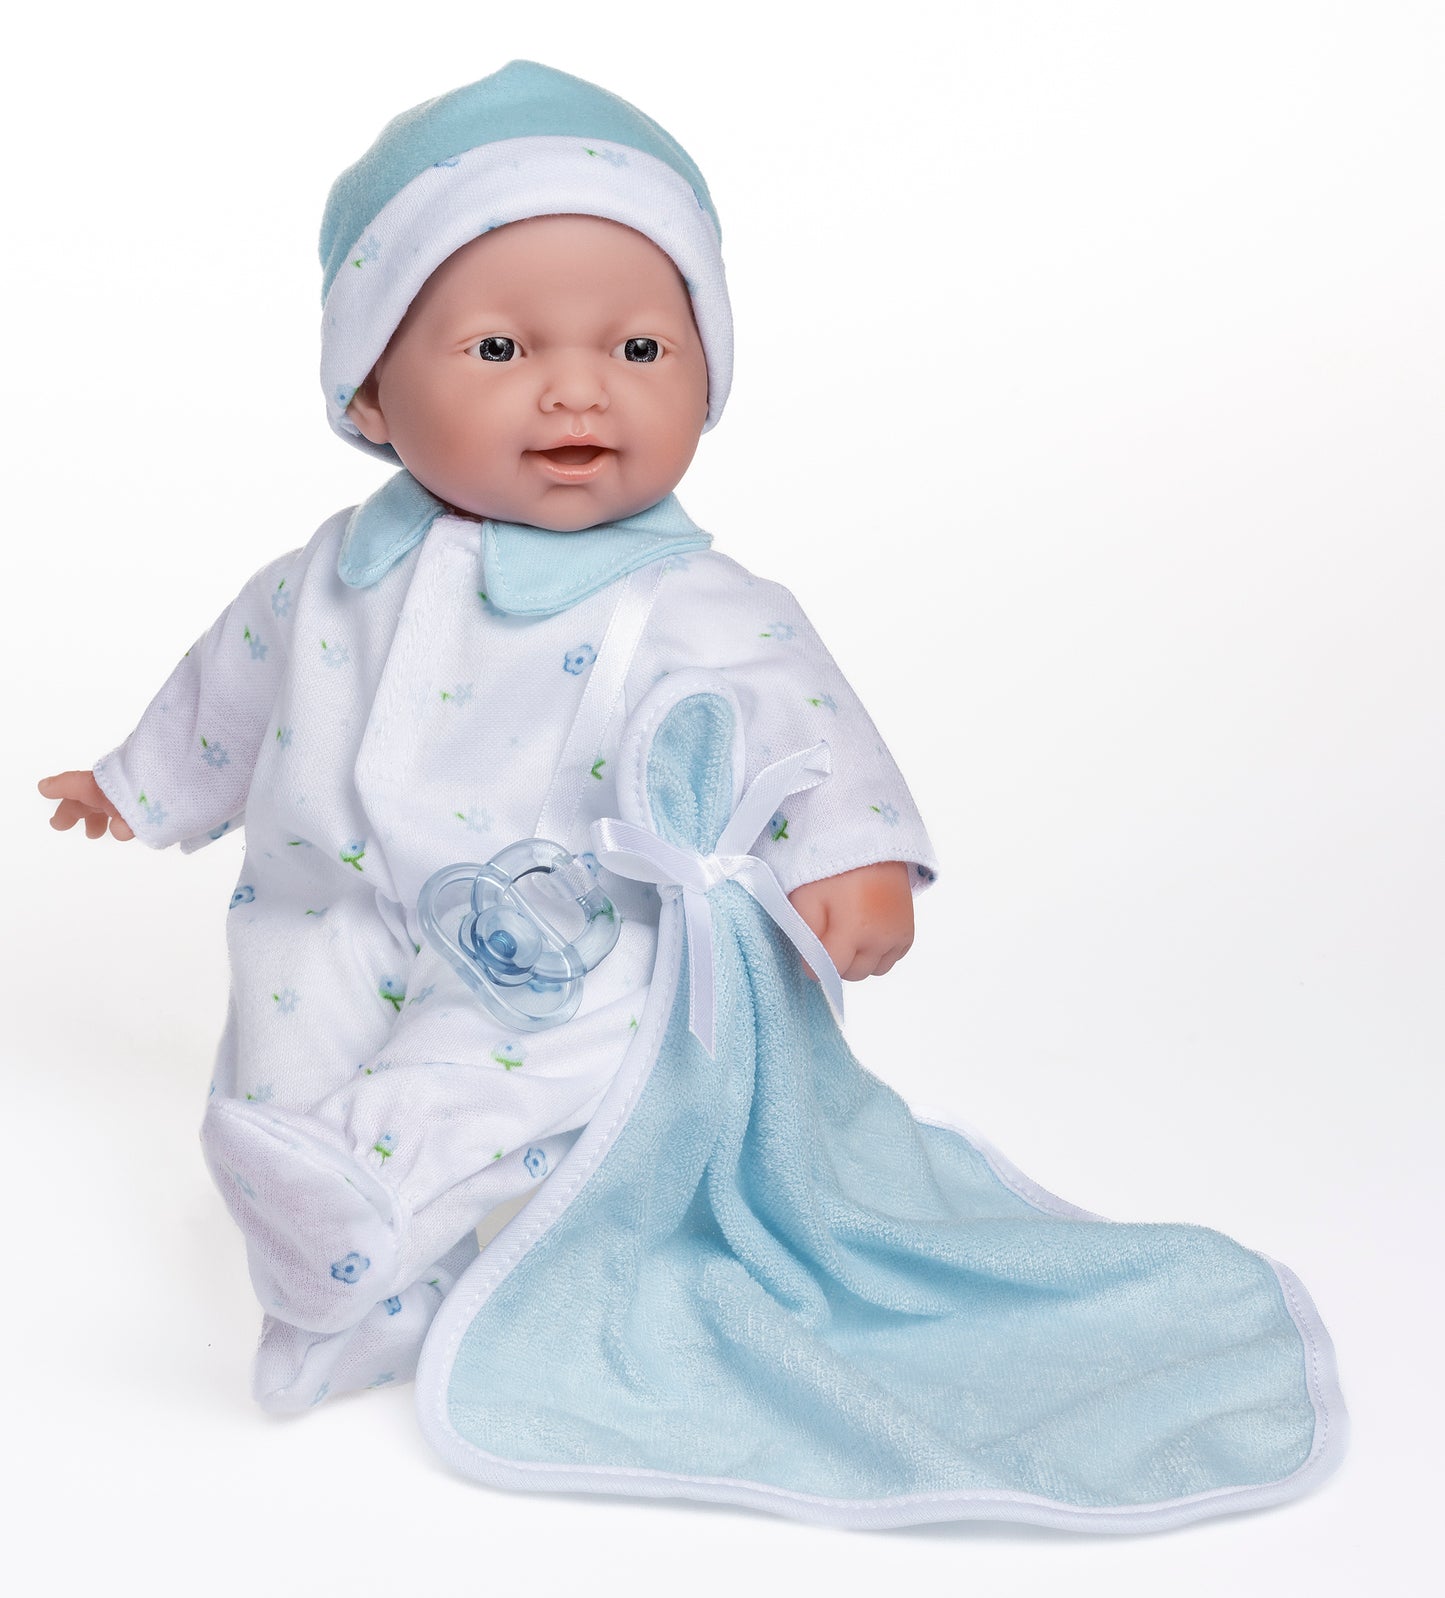 JC Toys, La Baby 11 inch Soft Body Baby Doll in Blue With Realistic Features